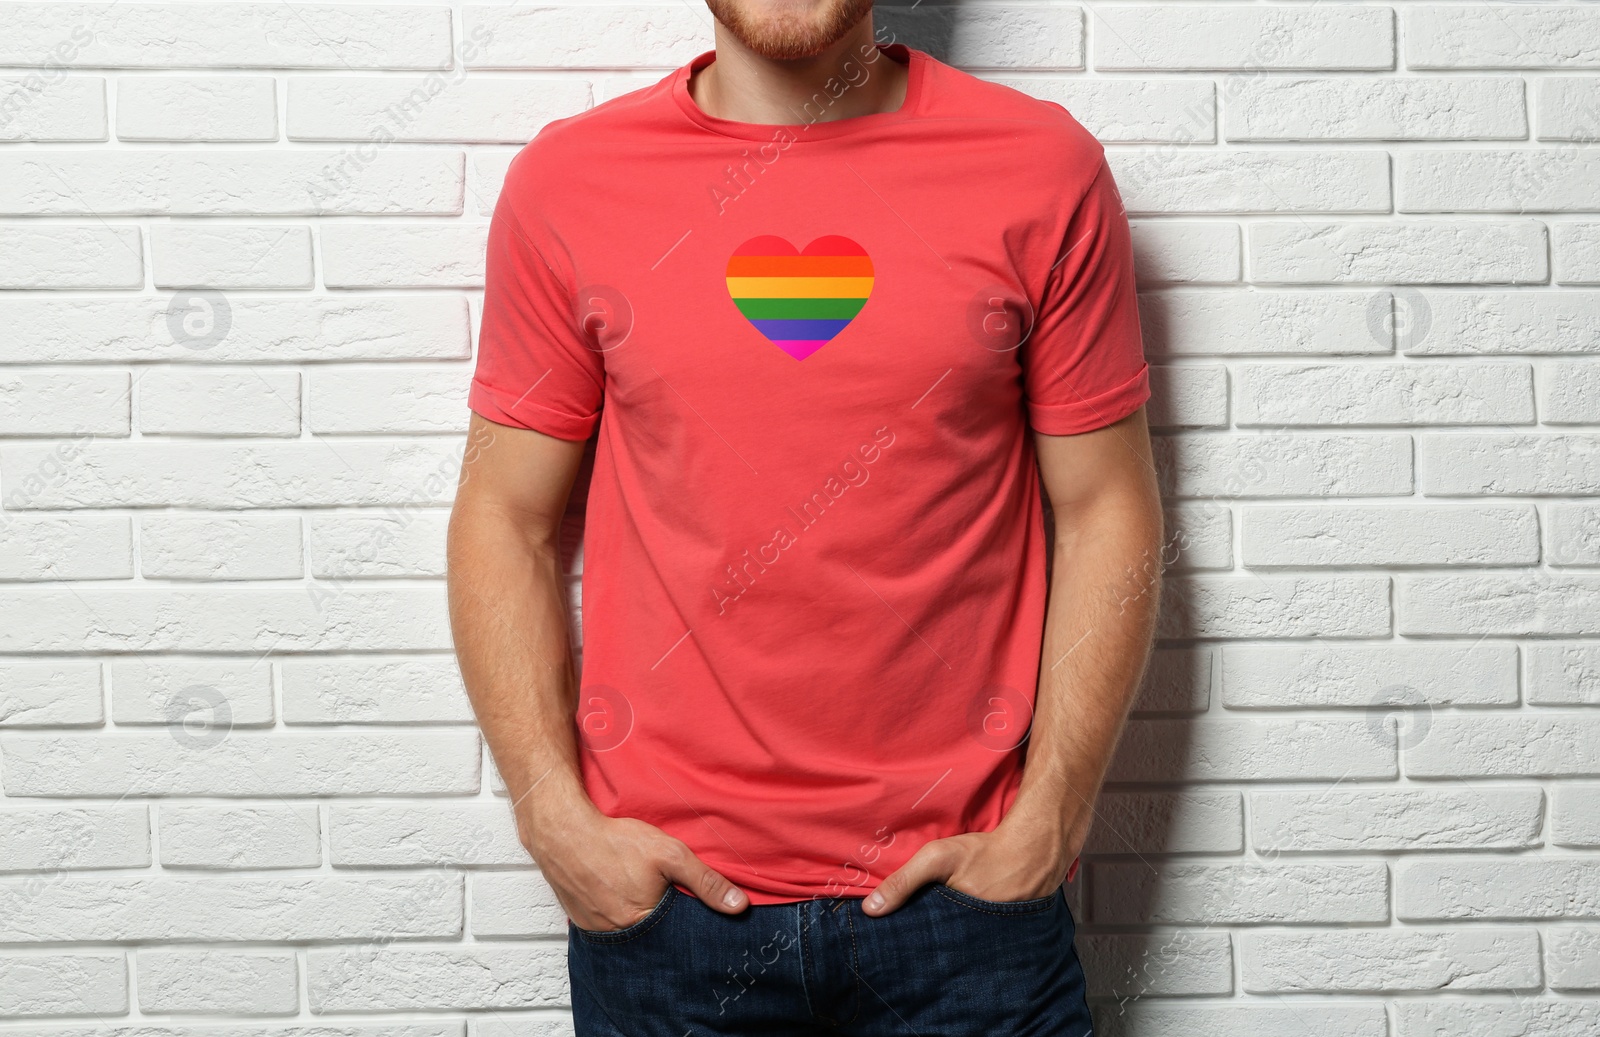 Image of Young man wearing t-shirt with image of heart shaped LGBT pride flag near white brick wall